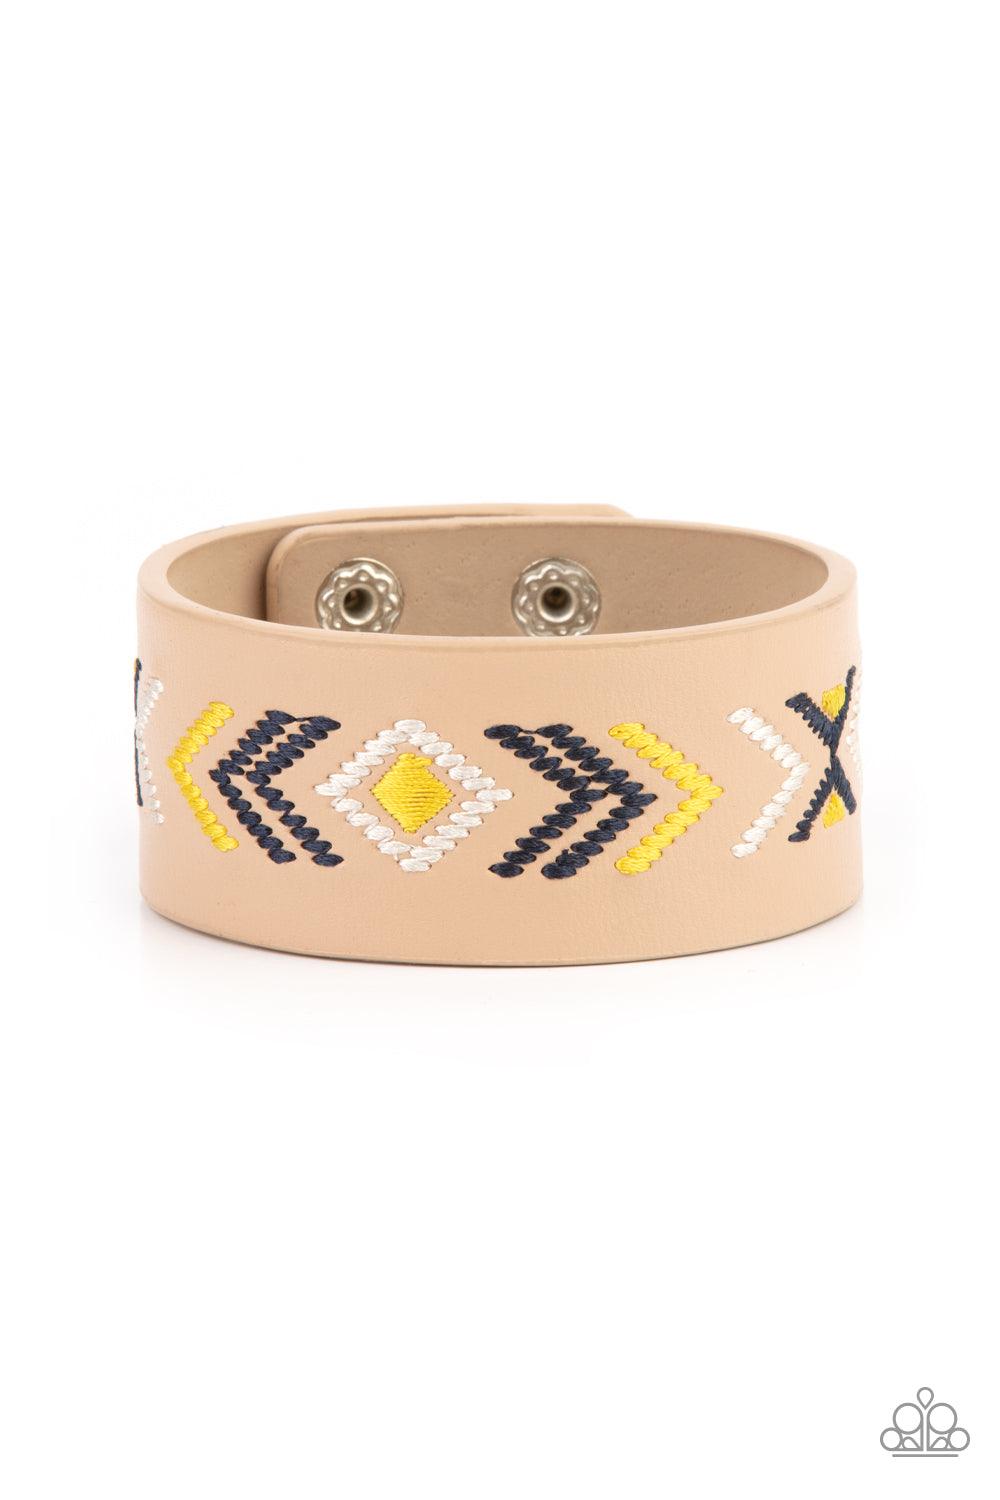 Paparazzi Accessories Cliff Glyphs - Yellow Yellow, blue, and white thread is stitched across the front of a brown leather band, creating a colorful tribal inspired pattern. Features an adjustable snap closure. Sold as one individual bracelet. Jewelry